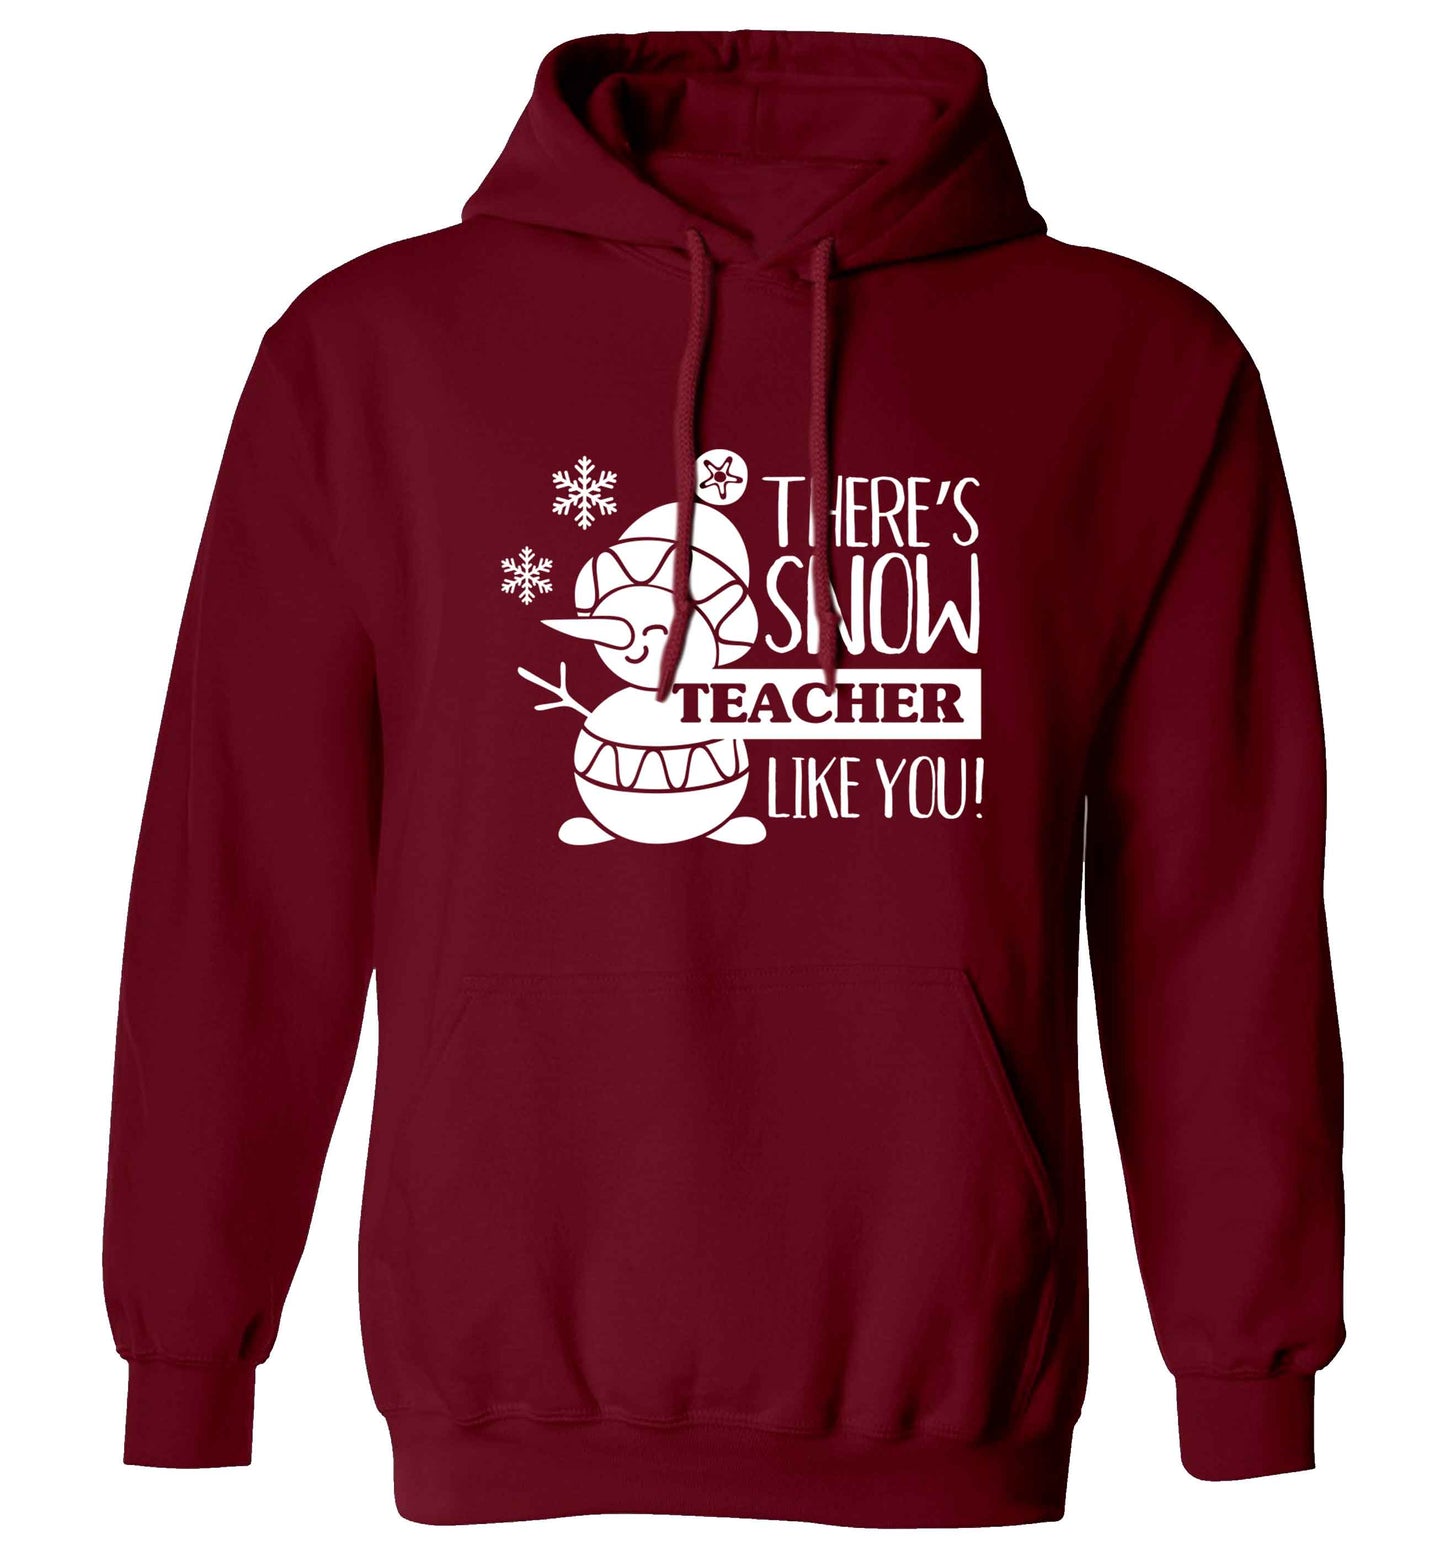 There's snow teacher like you adults unisex maroon hoodie 2XL